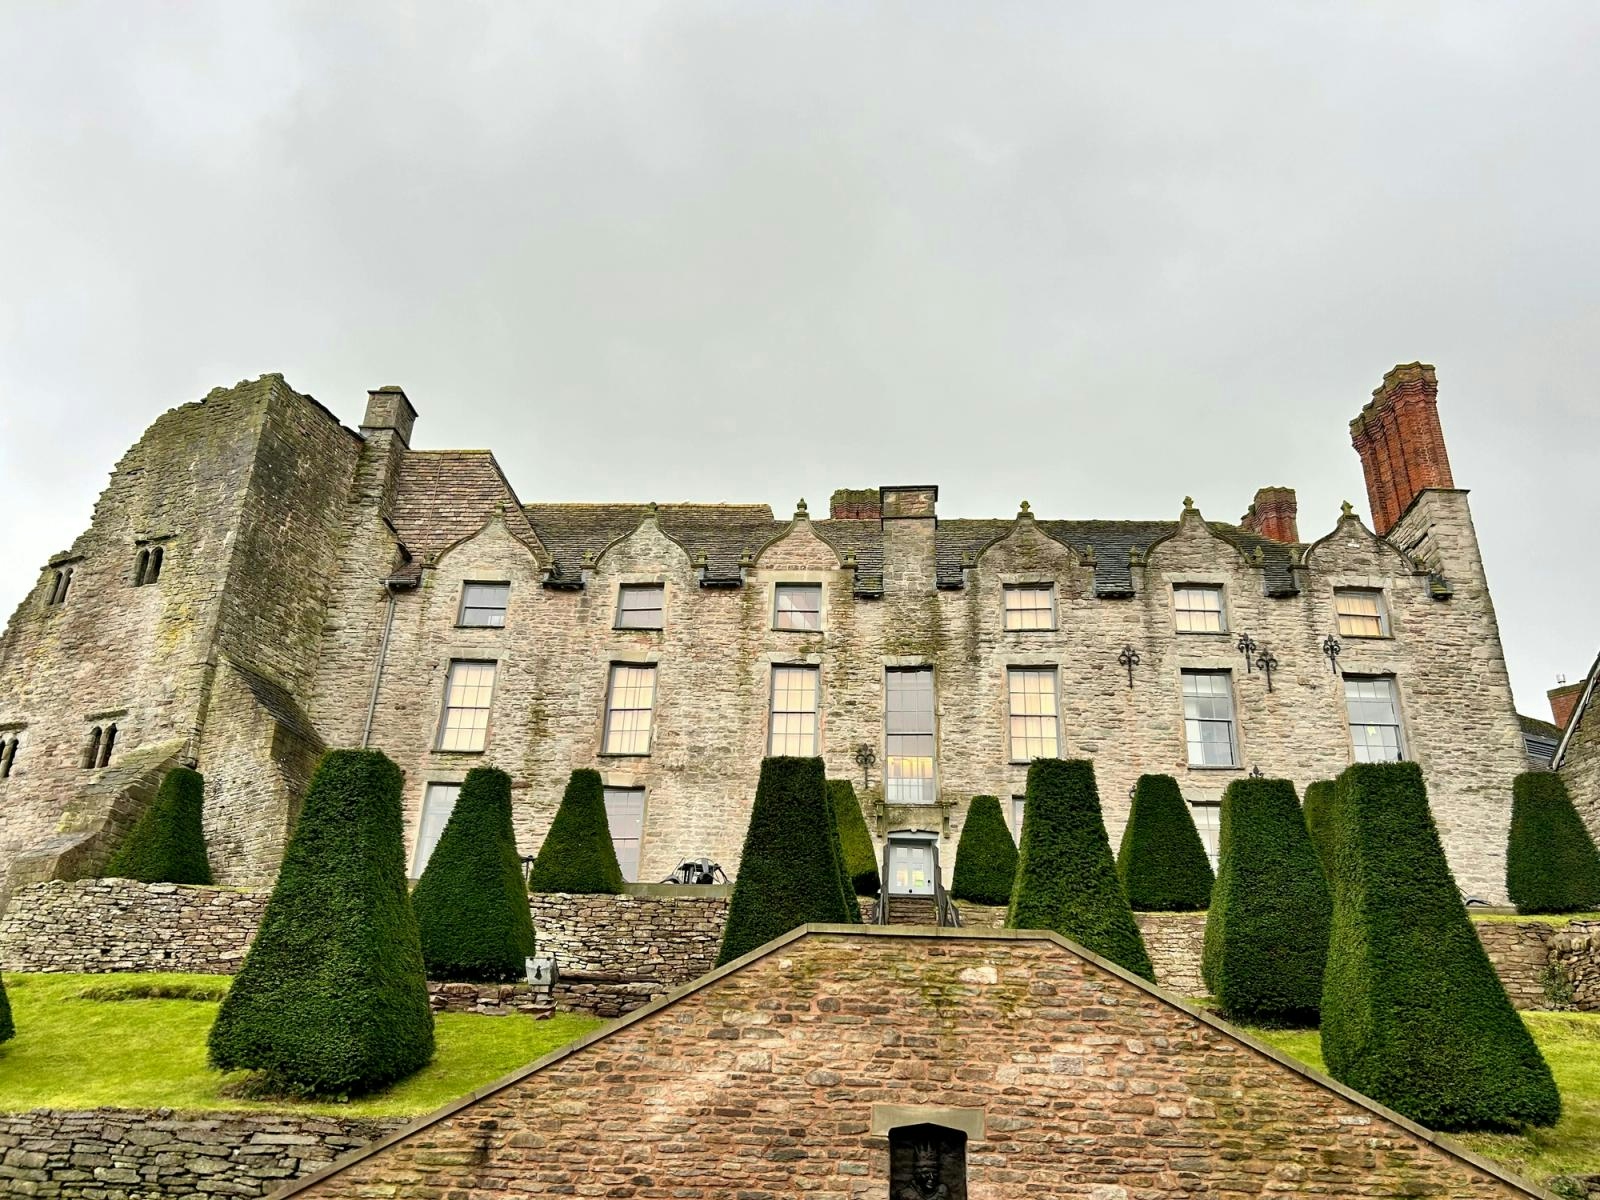 Wandering around the castle in Hay-on-Wye